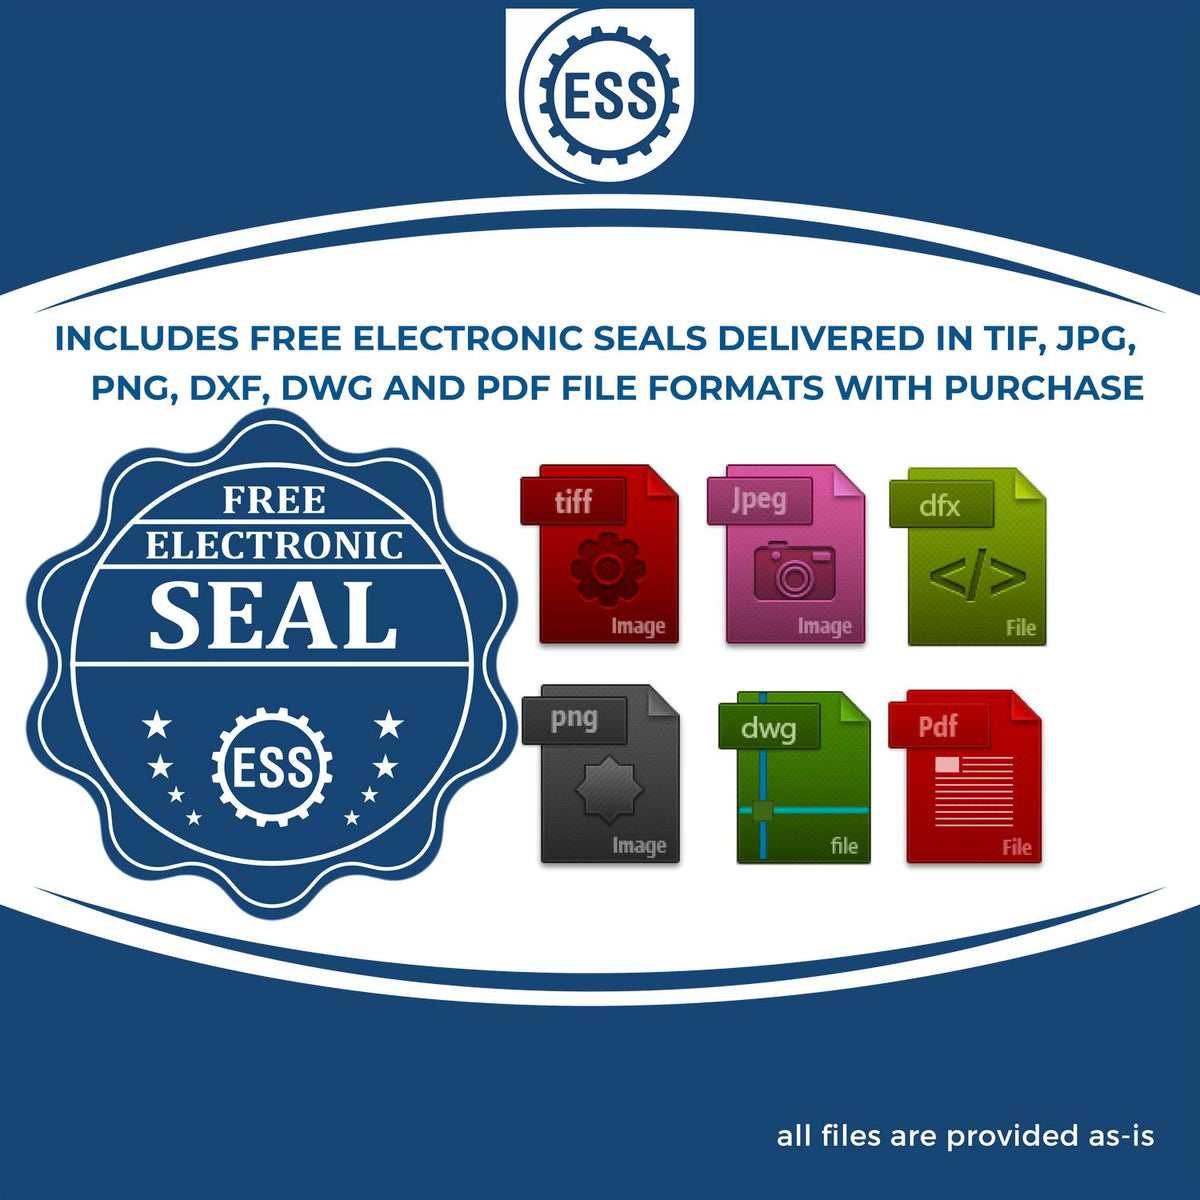 An infographic for the free electronic seal for the North Carolina Geologist Desk Seal illustrating the different file type icons such as DXF, DWG, TIF, JPG and PNG.